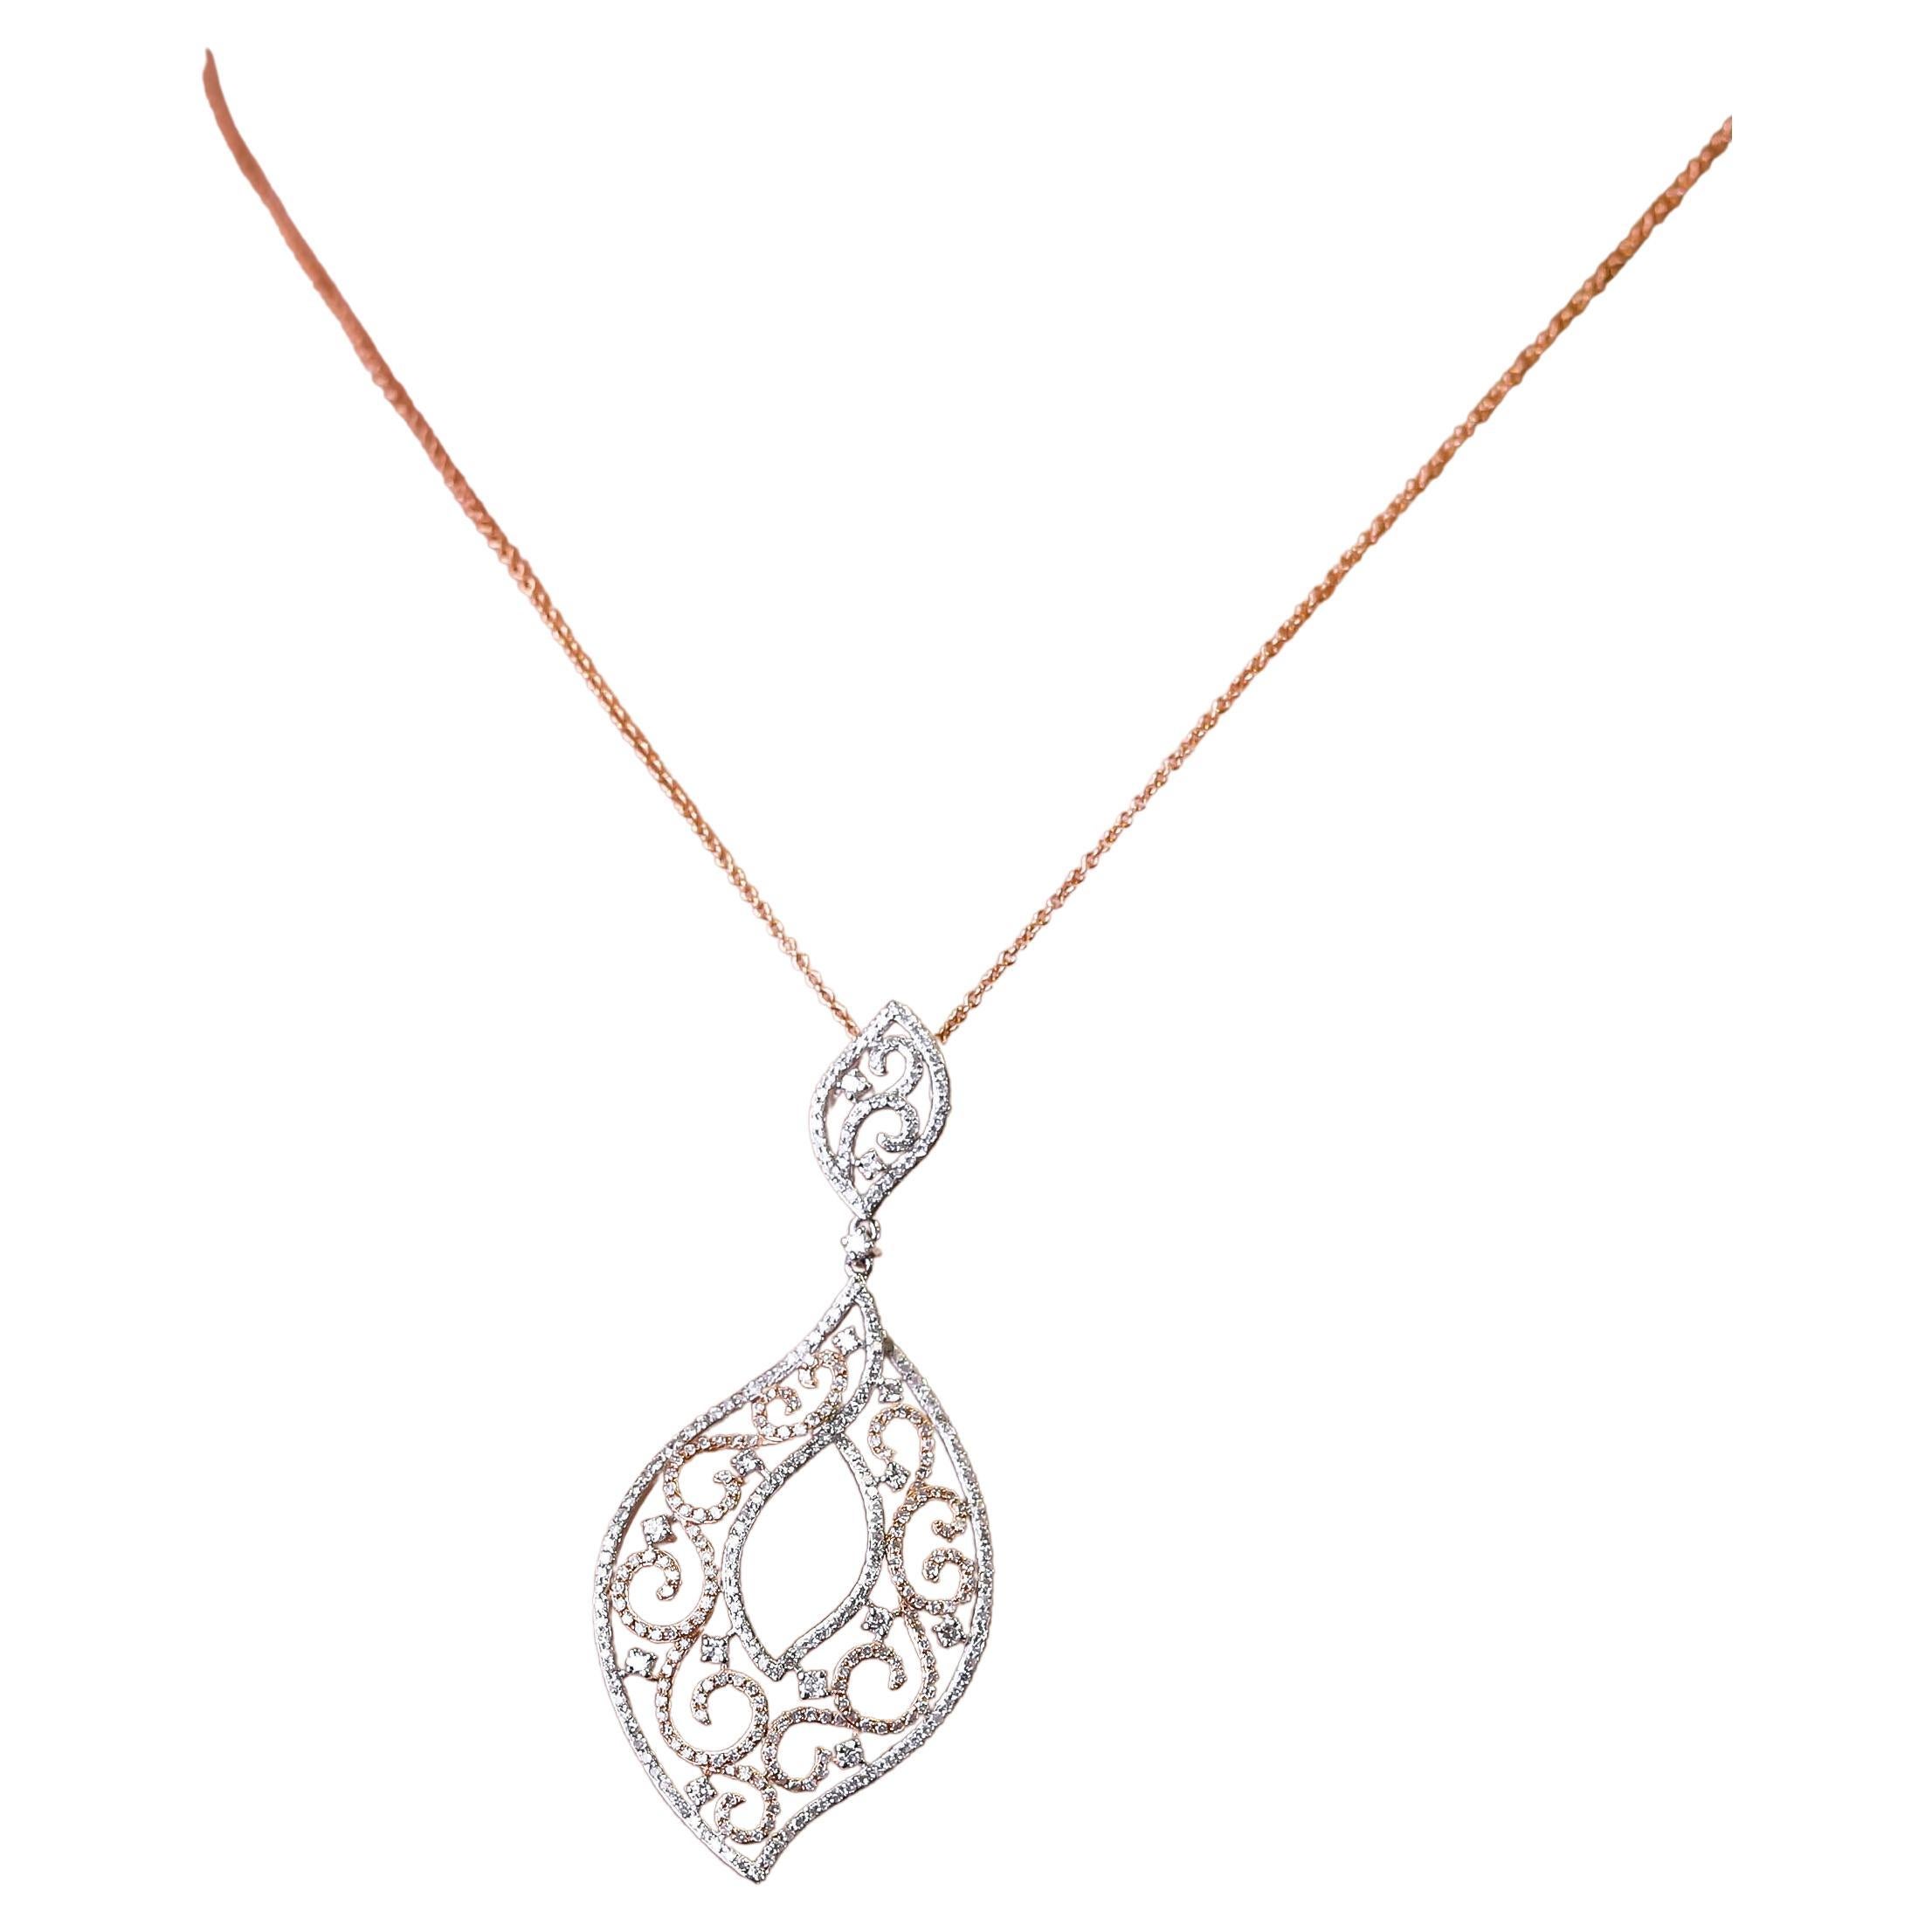 1.29 Carat Diamond 14 Karat Two-Tone Gold Filigree Pendant Fine Jewelry Collection
 
Dramatic design. Created in 14k rose and white gold this dramatic pendant necklace features 1.29 TCW or round shimmering diamonds delicately layered in an ornament